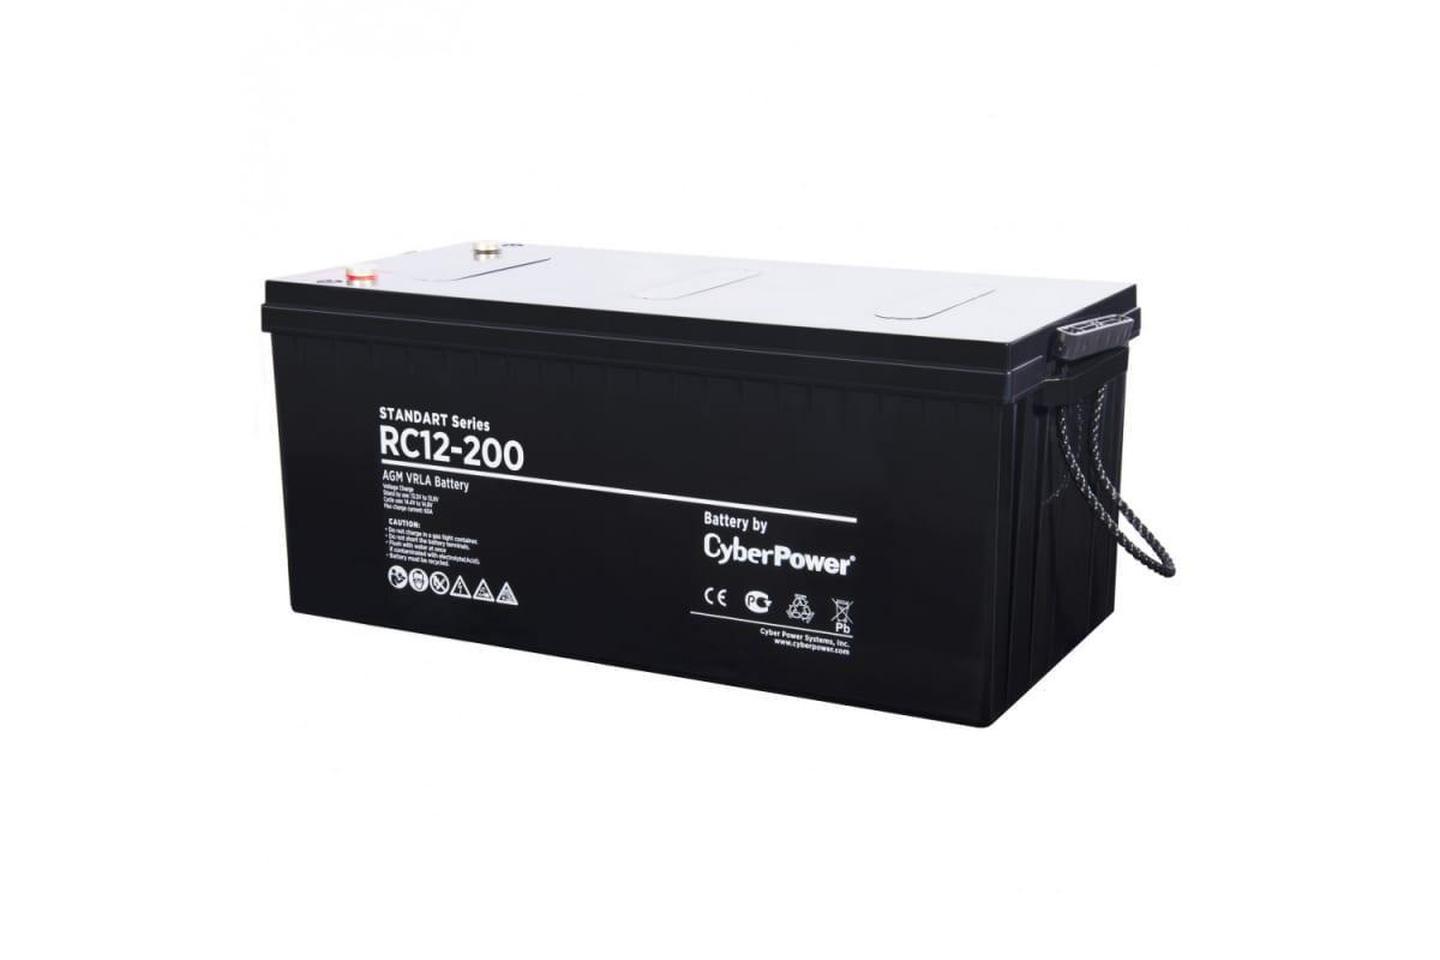 Battery CyberPower Standart series RС 12-200, voltage 12V, capacity (discharge 10 h) 202Ah, max. discharge current (5 sec) 1000A, max. charg